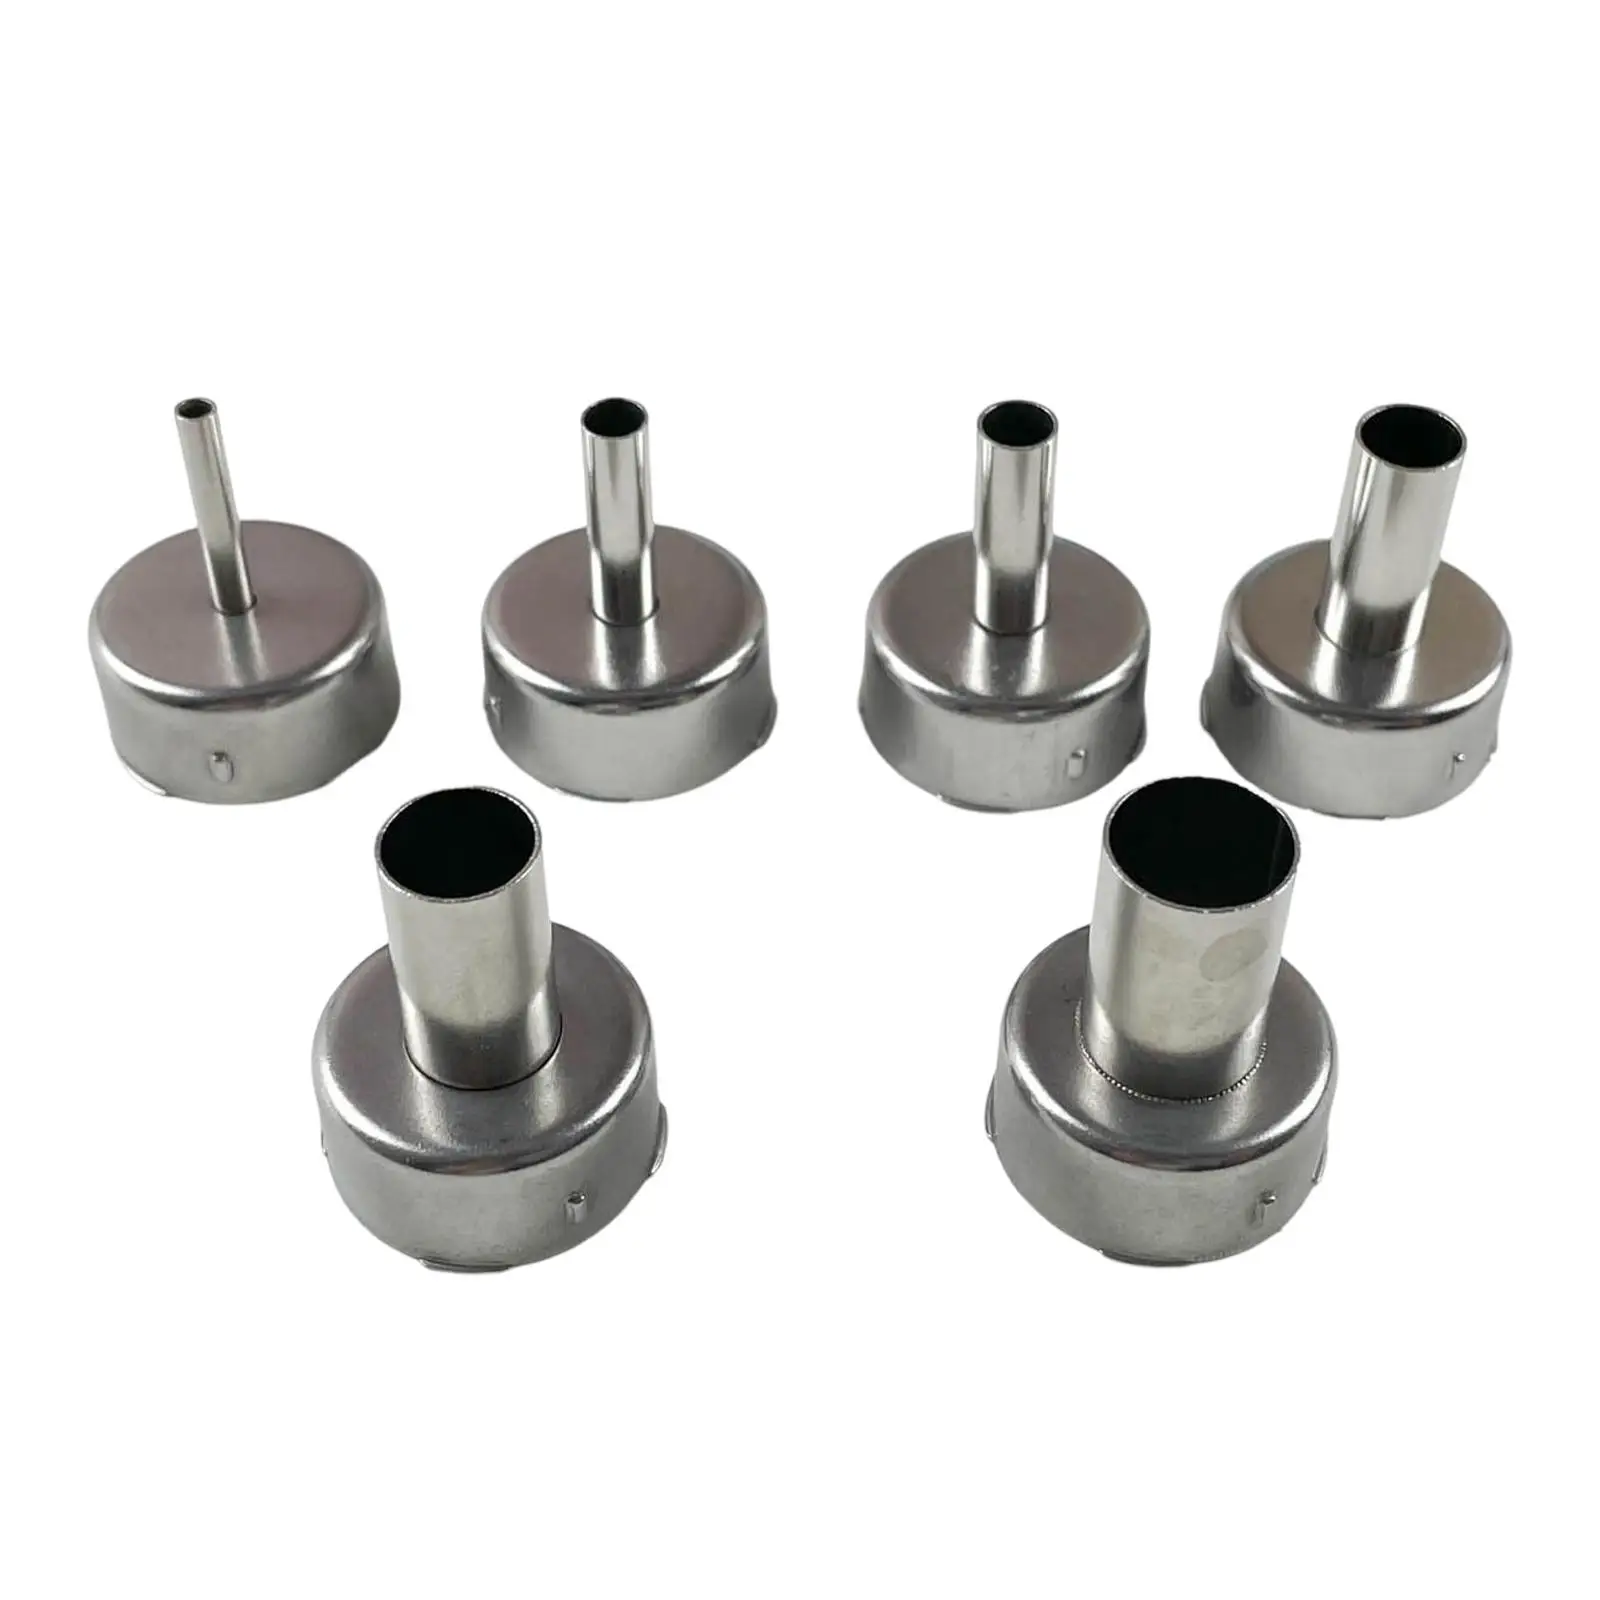 

Hot Air Equipment Nozzle Parts Replaces Portable for Heat Desoldering Easy to Install Hot Air Tool Nozzle Welding Head